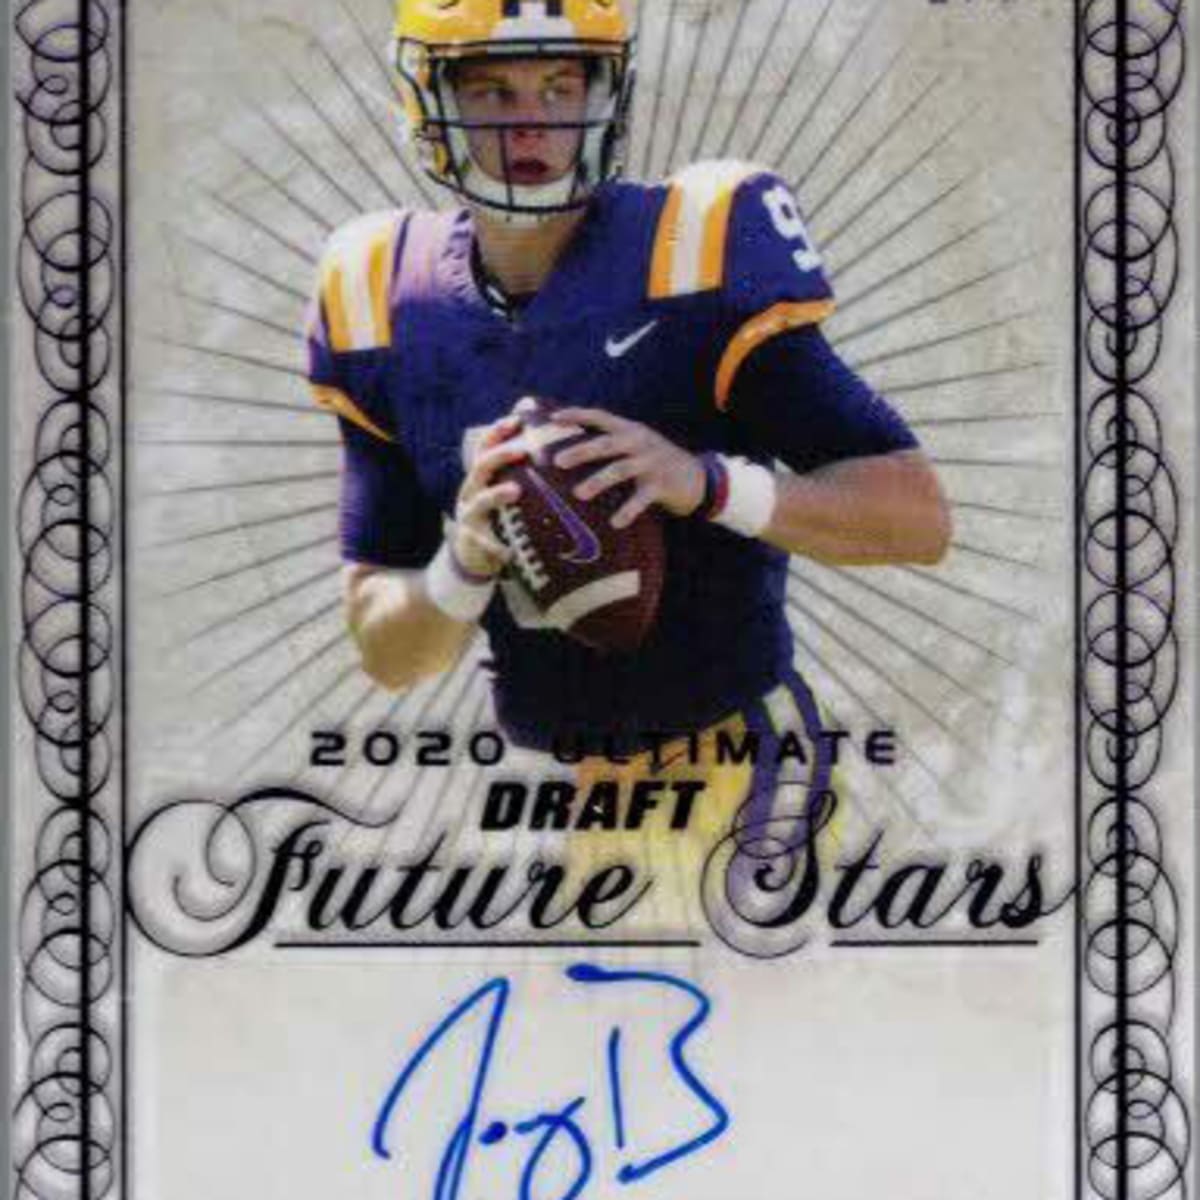 Child who got autograph from Joe Burrow wants to gift the